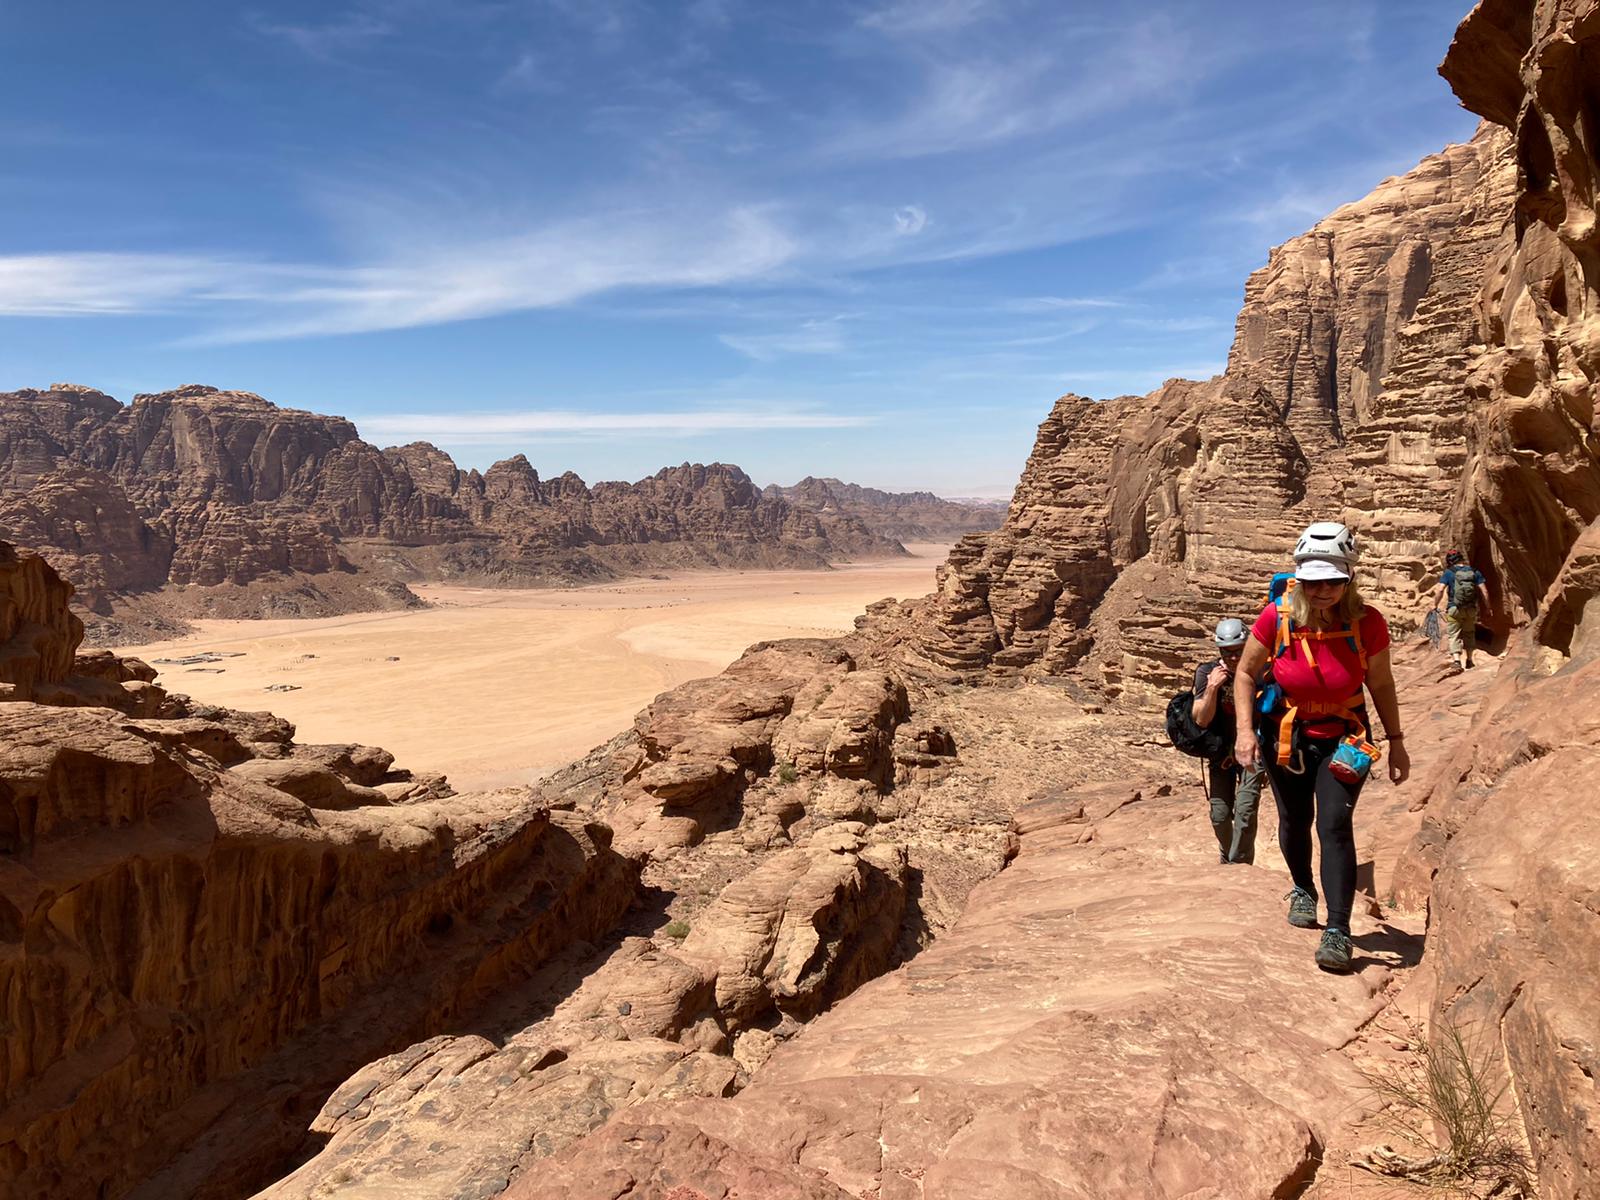 A group of people hiking in Jordan during a Mapo Tapo trip